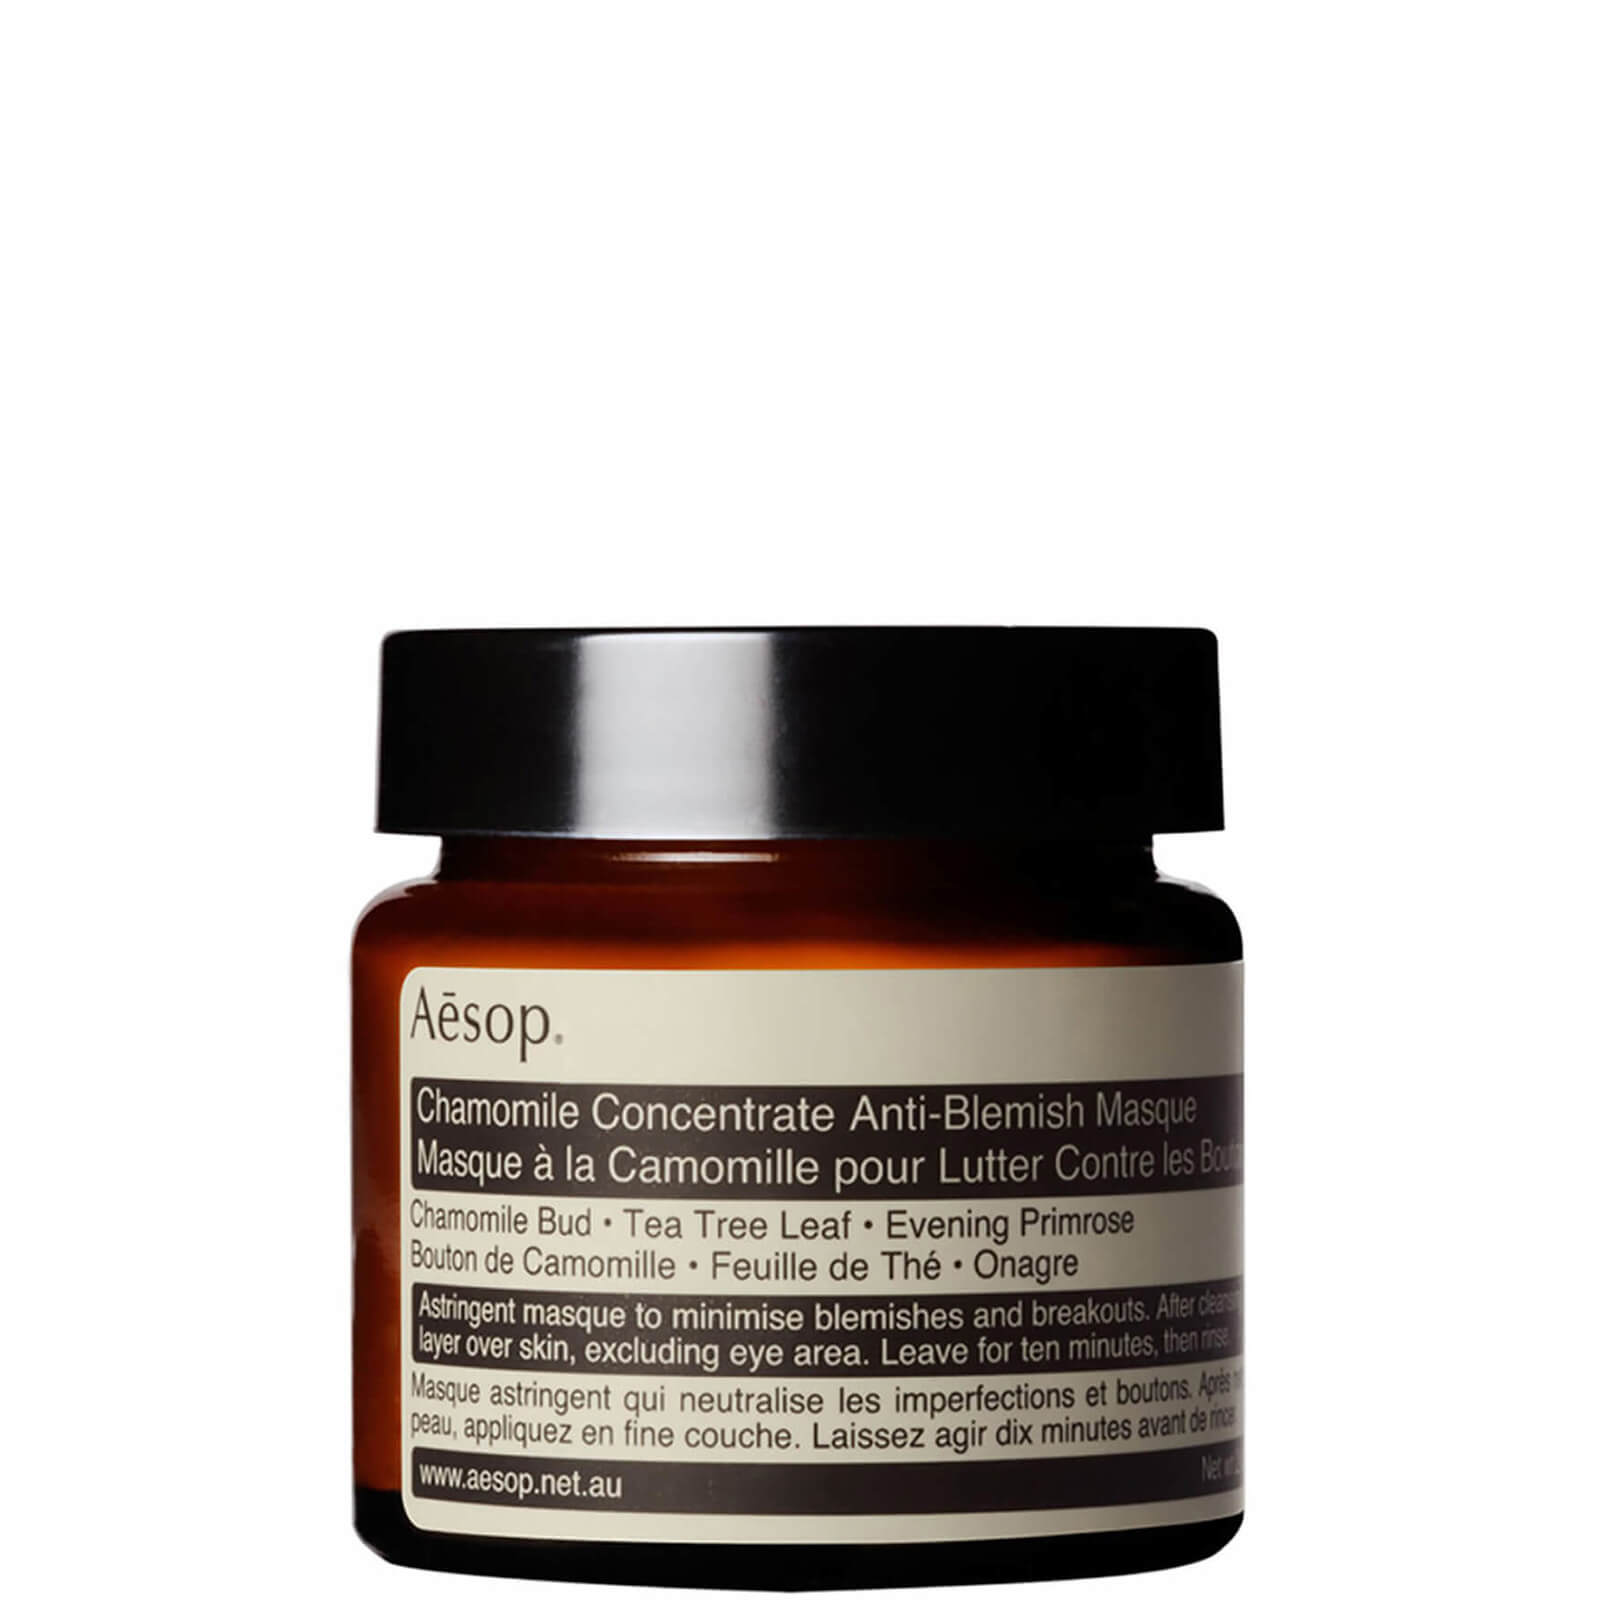 Photos - Facial Mask Aesop Chamomile Concentrate Anti-Blemish Mask 60ml 